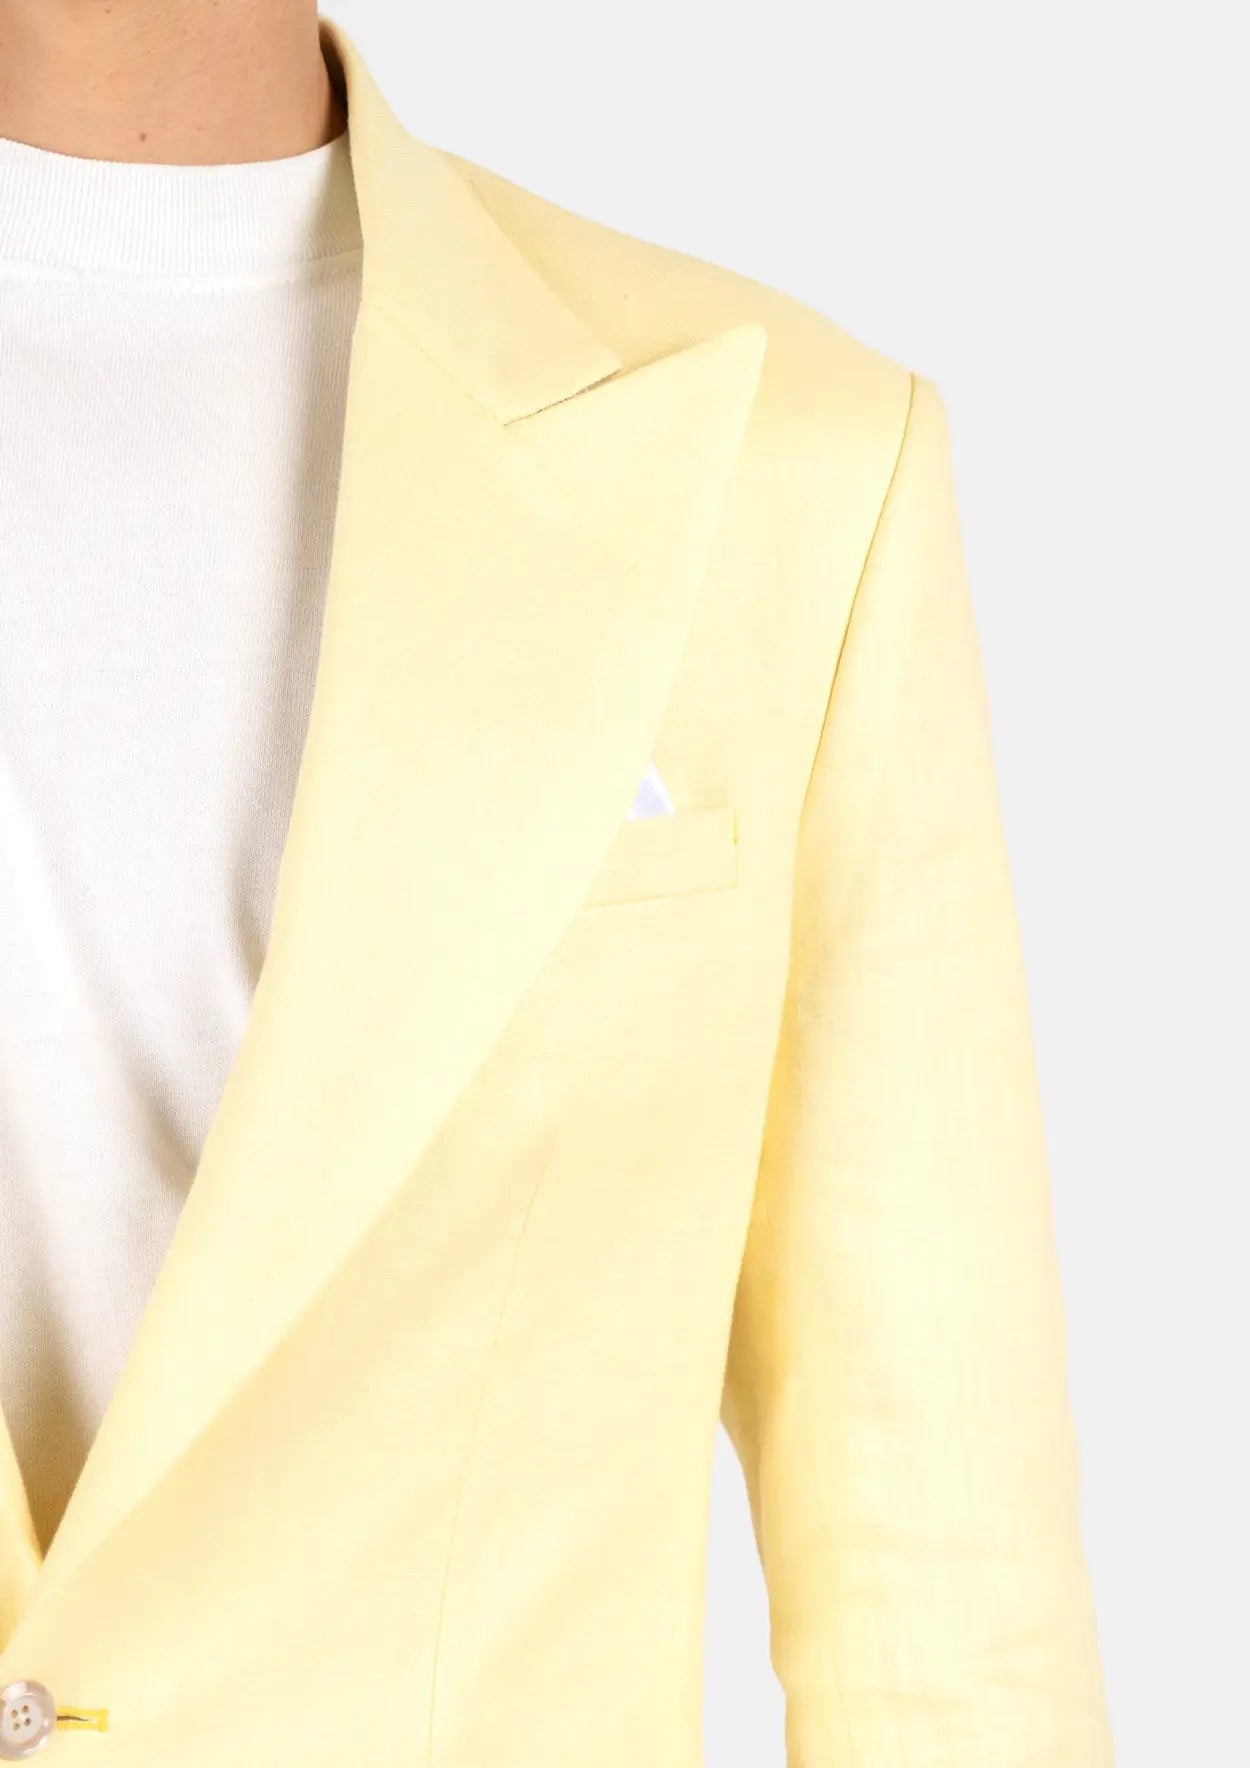 Detail of a light brown suit jacket with cream colored shirt and white  handkerchief, yellow patterned necktie and yellow flower Stock Photo - Alamy